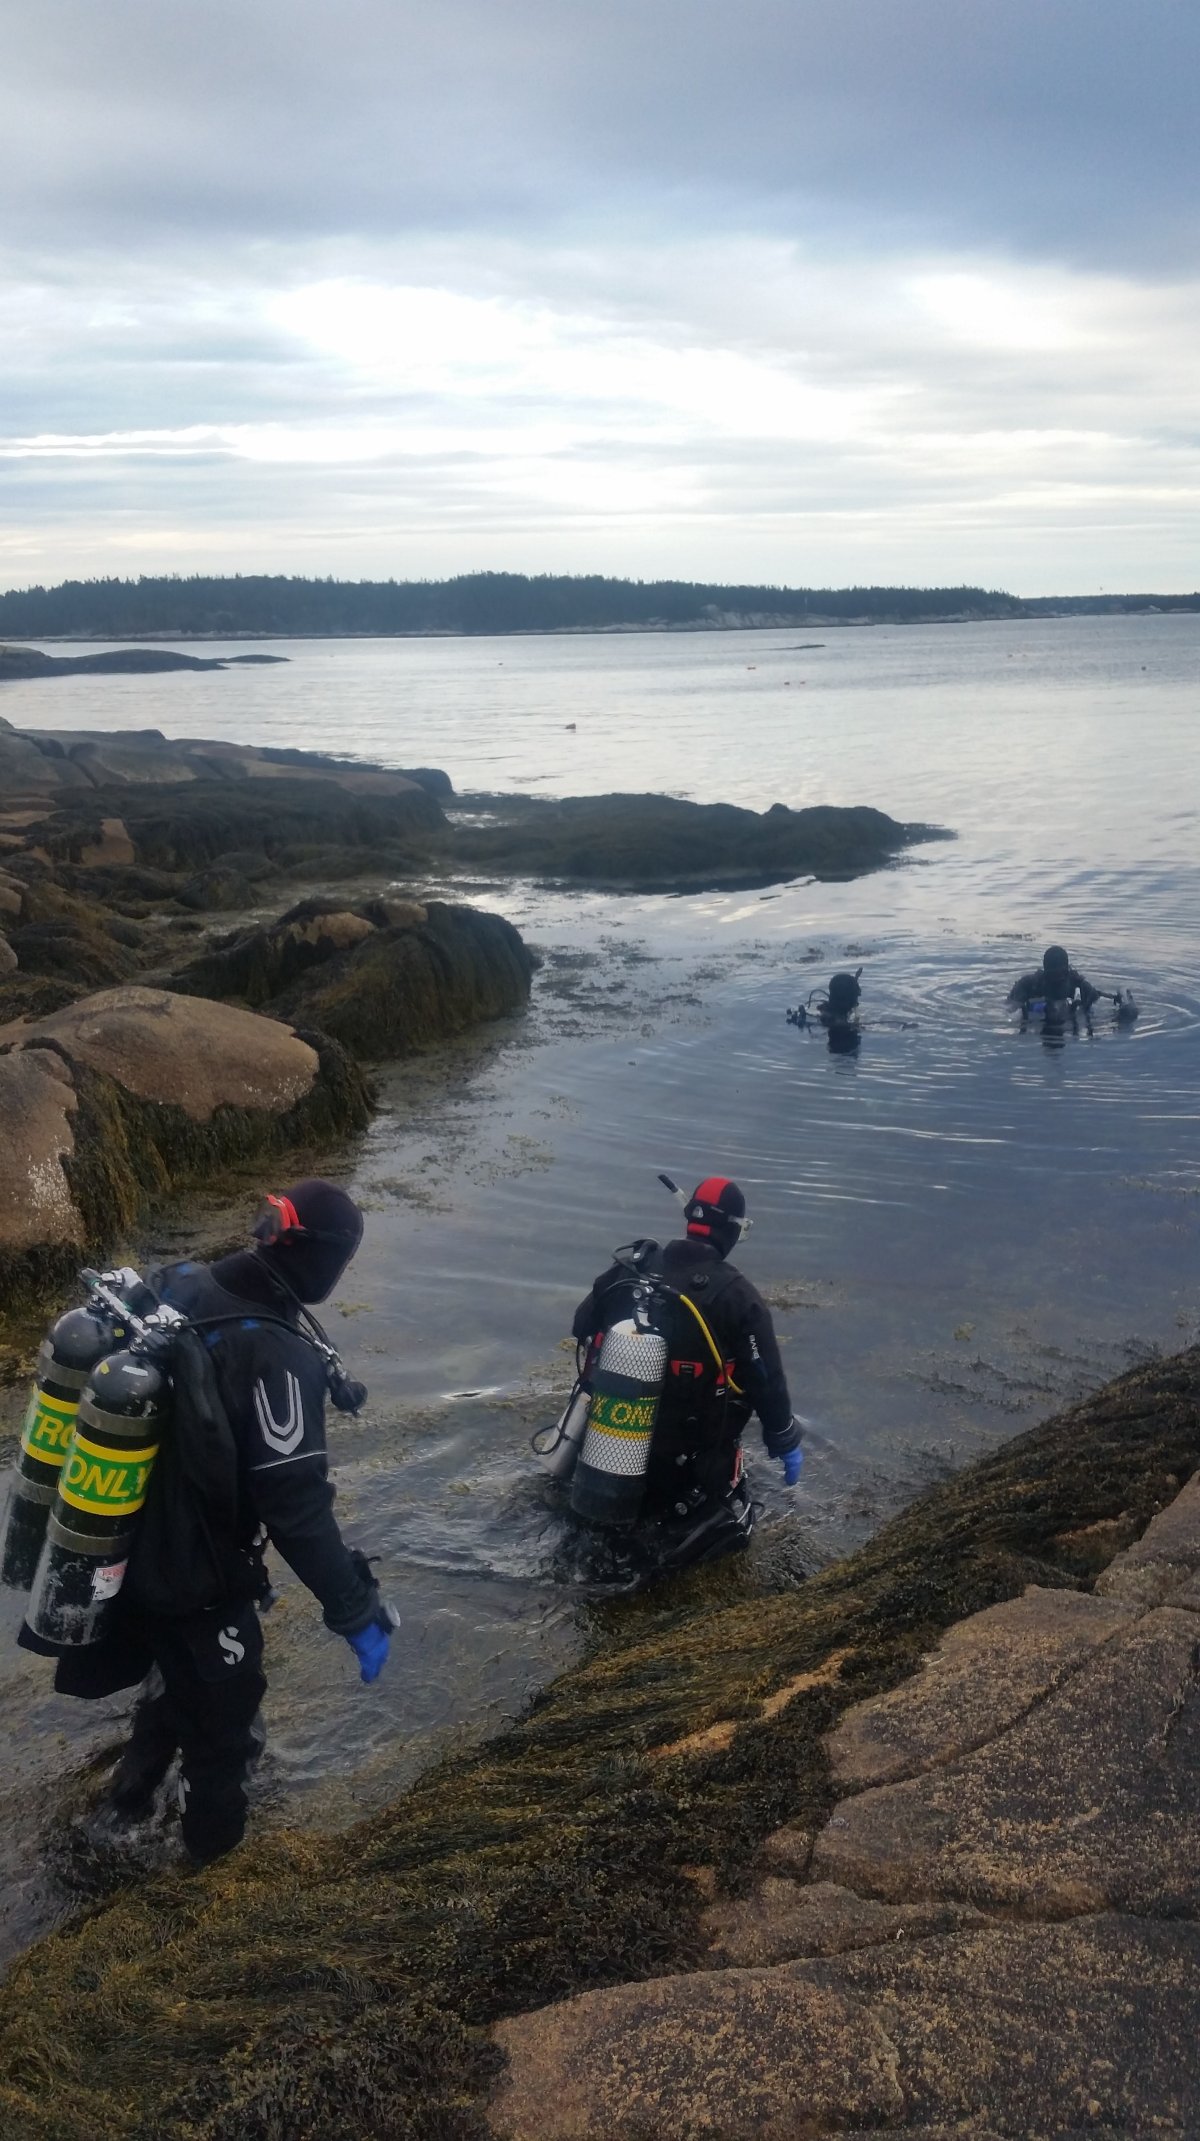 Scuba divers in Nova Scotia prepare to enter the waters of the Northwest Arm of the Atlantic Ocean.